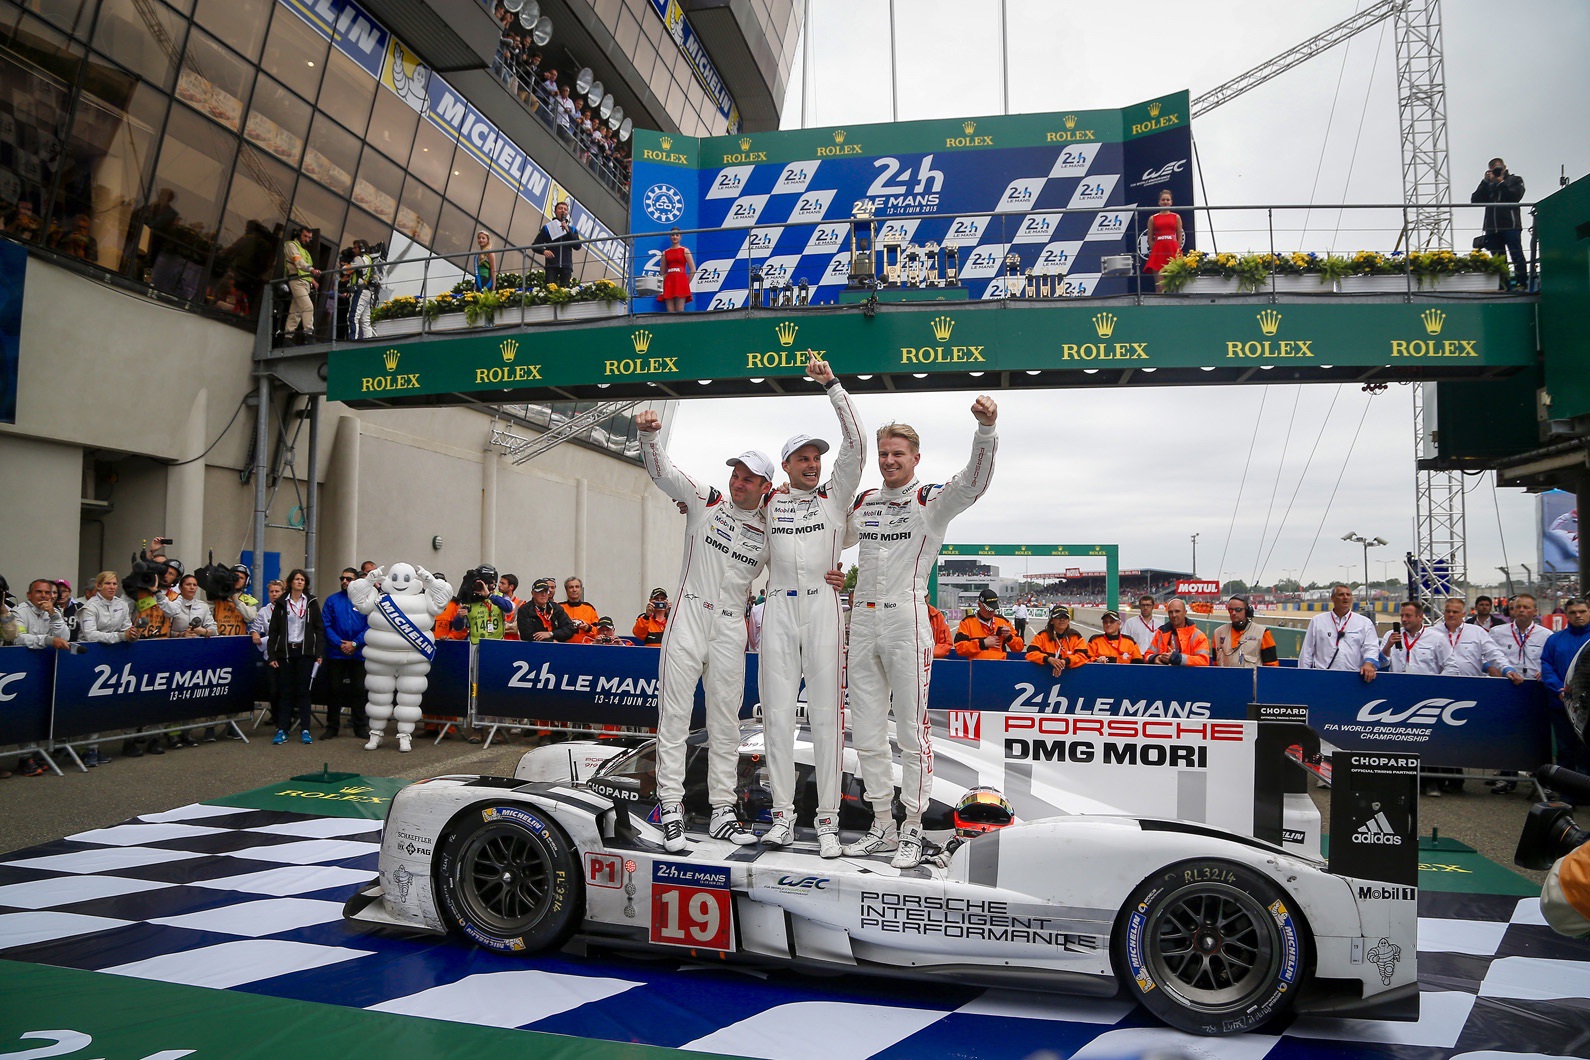 Left to right: Tandy, Bamber, Hulkenberg celebrate Porsche’s first 21st century overall win at Le Mans